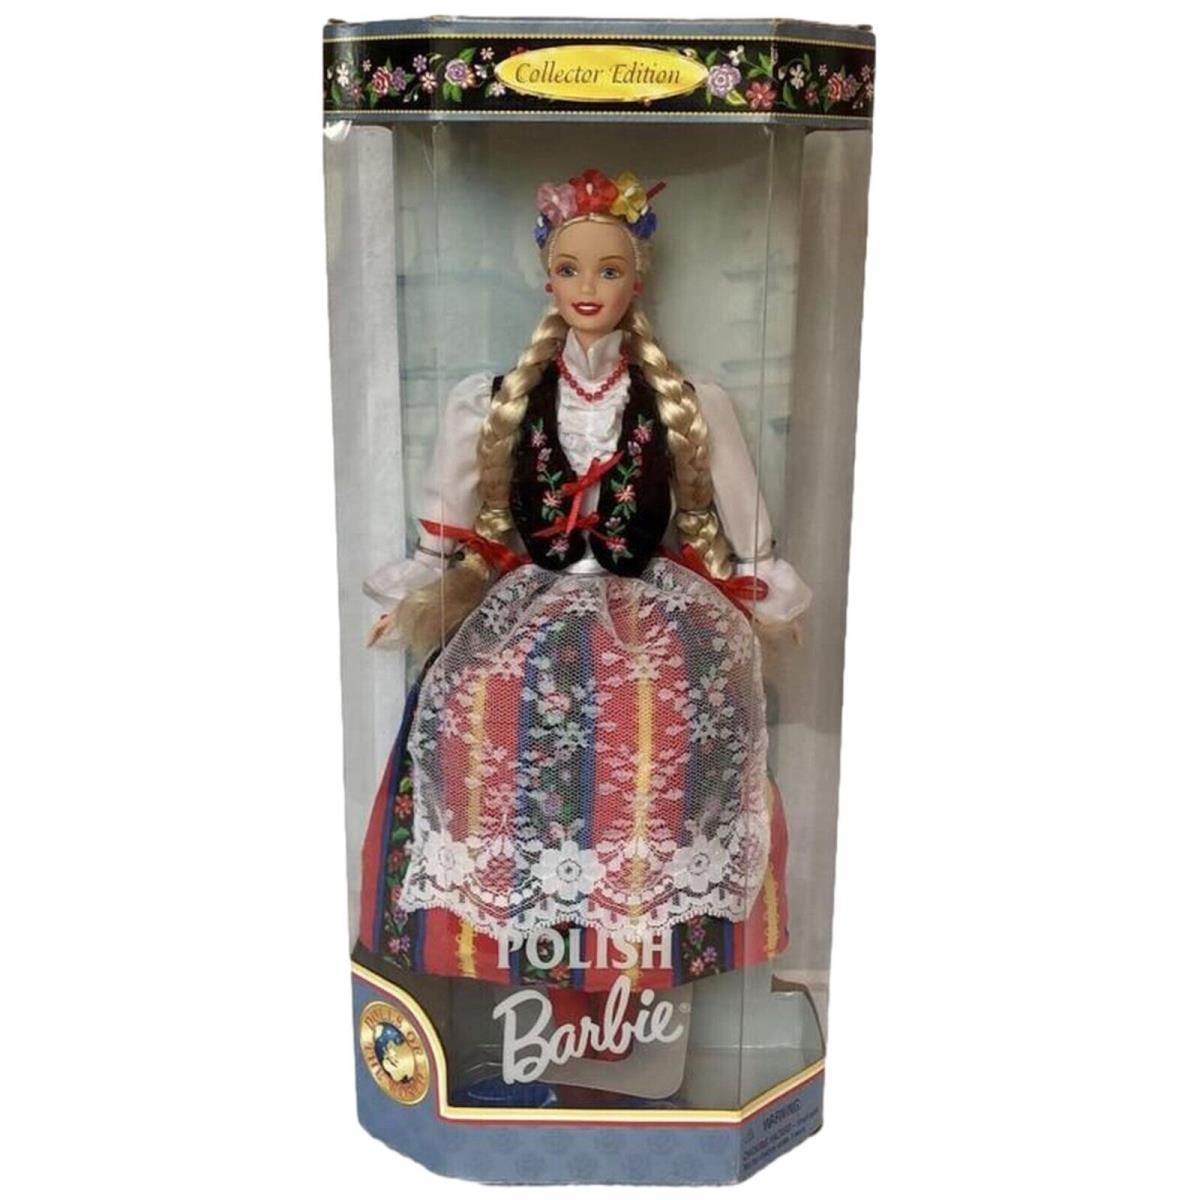 Polish Barbie - Dolls of The World - Collector Edition 1997 Nfrb